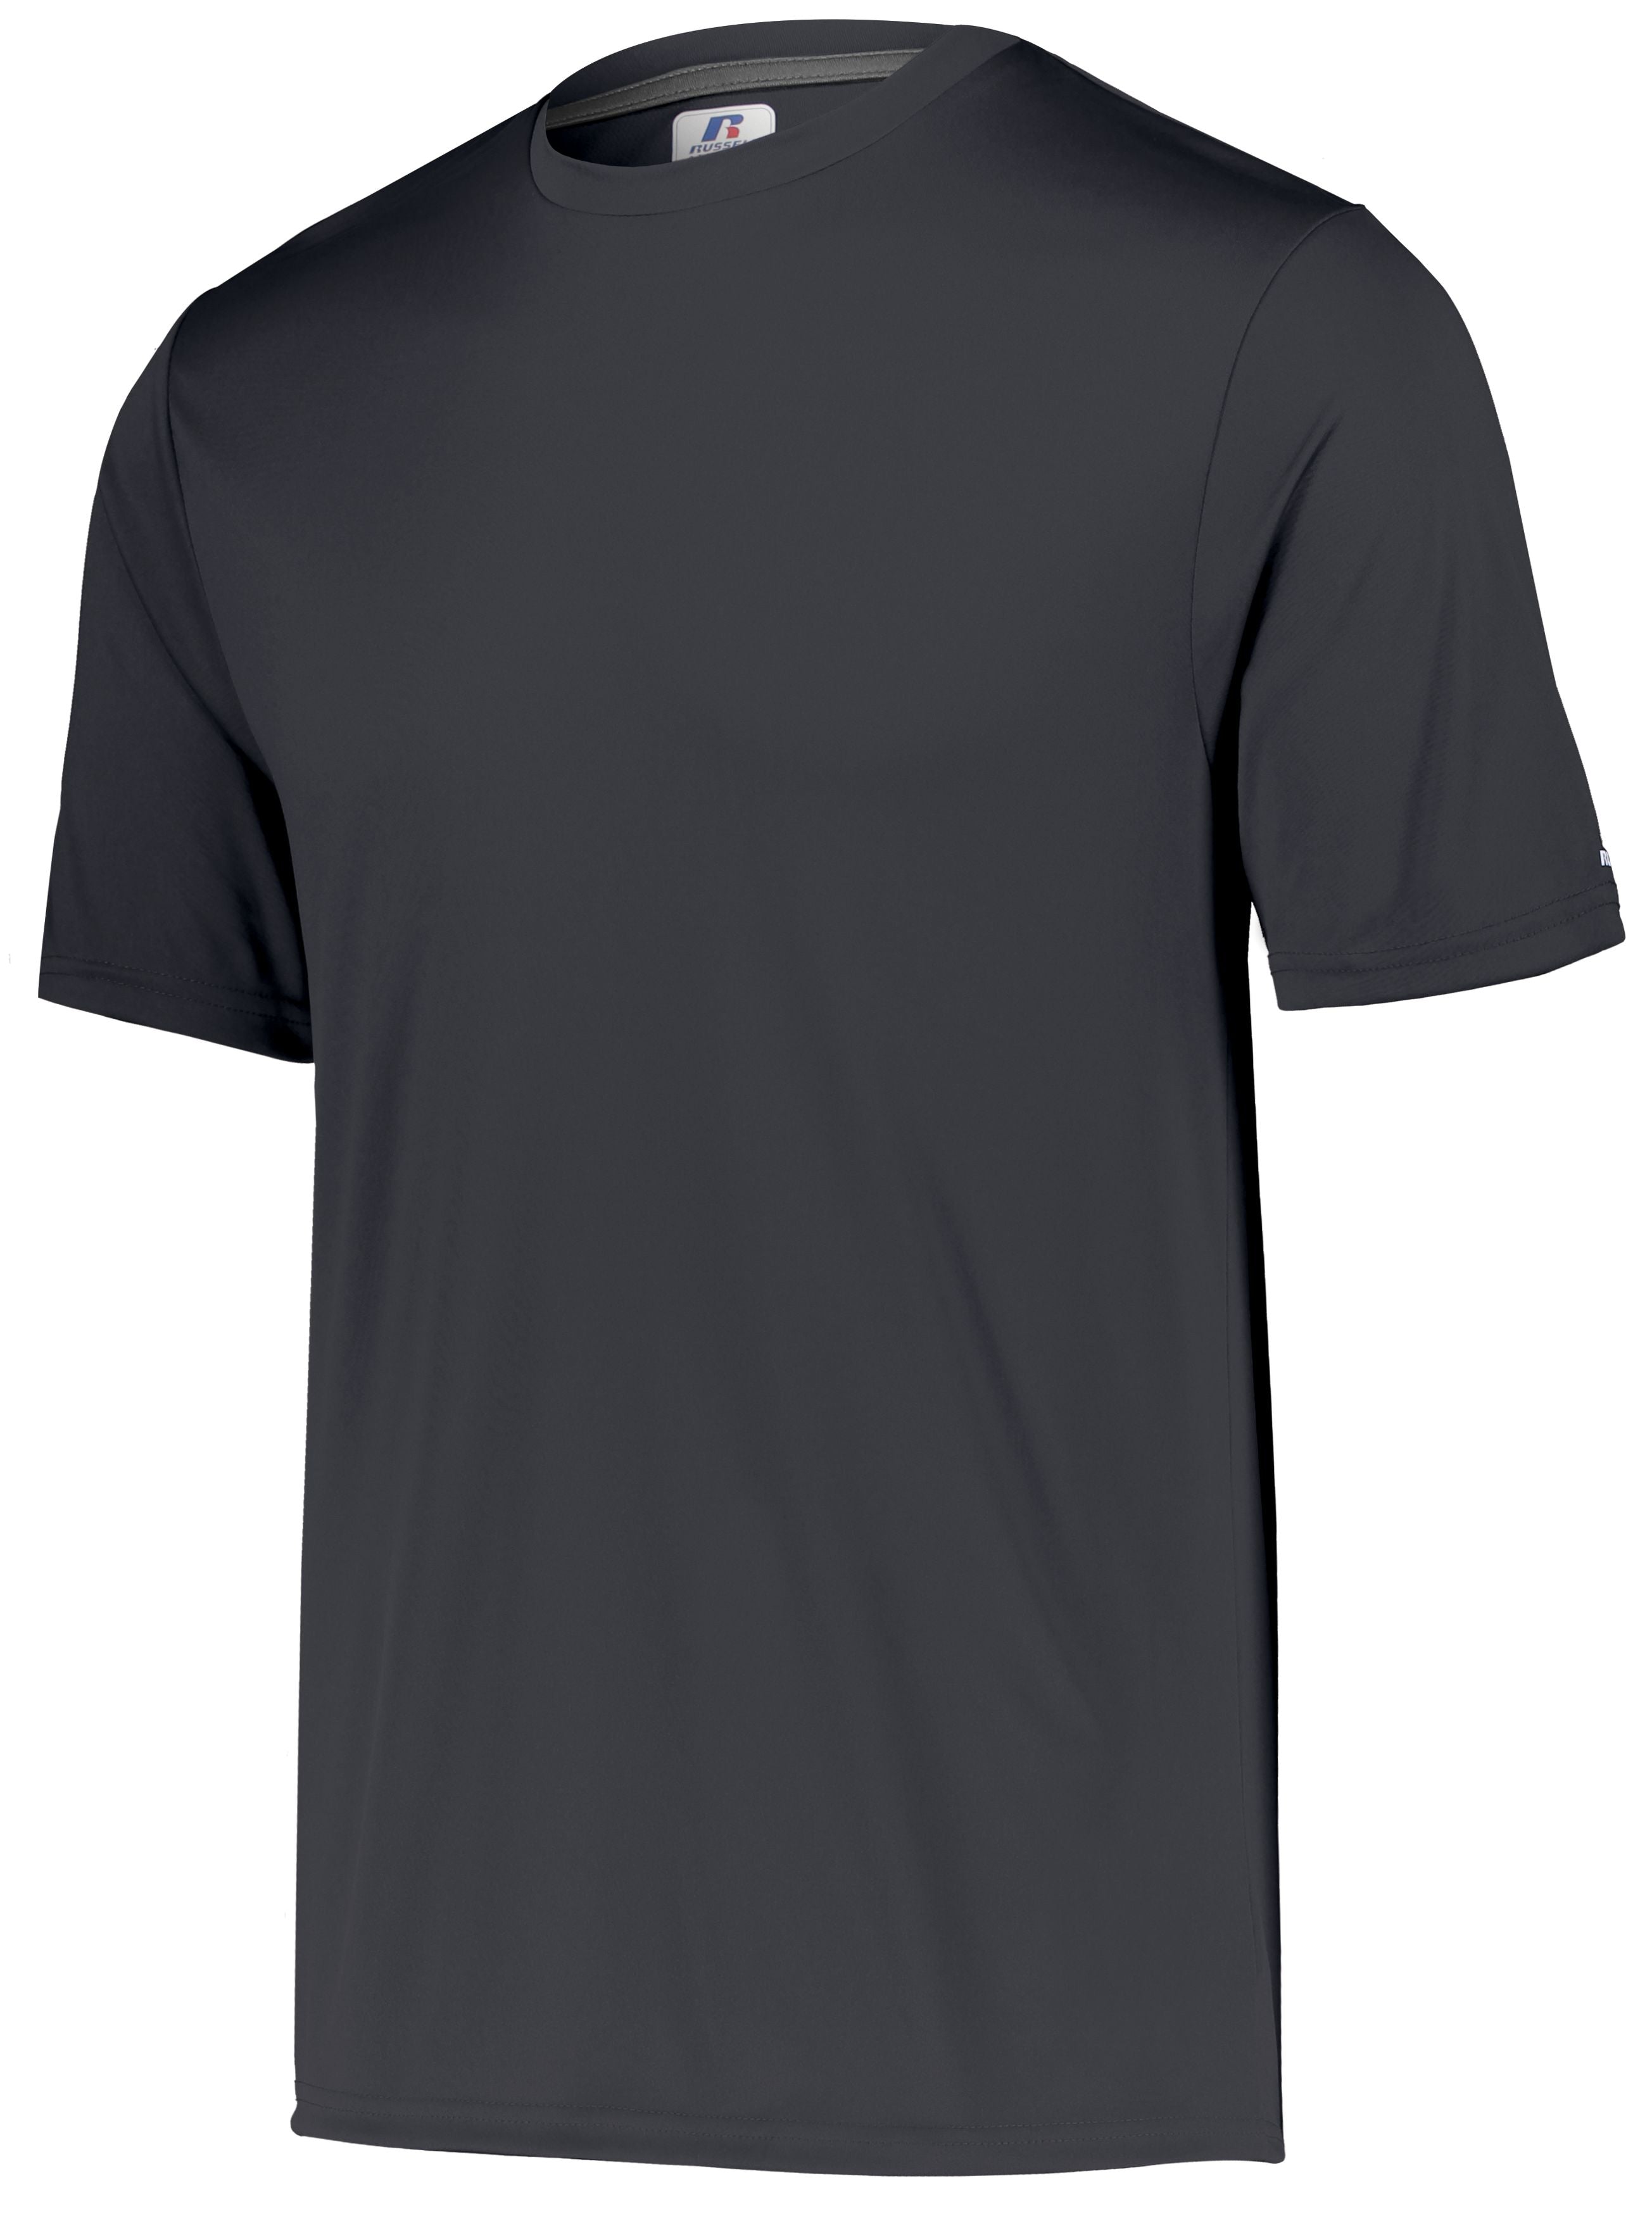 Russell Athletic Youth Dri-Power Core Performance Tee in Stealth  -Part of the Youth, Youth-Tee-Shirt, T-Shirts, Russell-Athletic-Products, Shirts product lines at KanaleyCreations.com